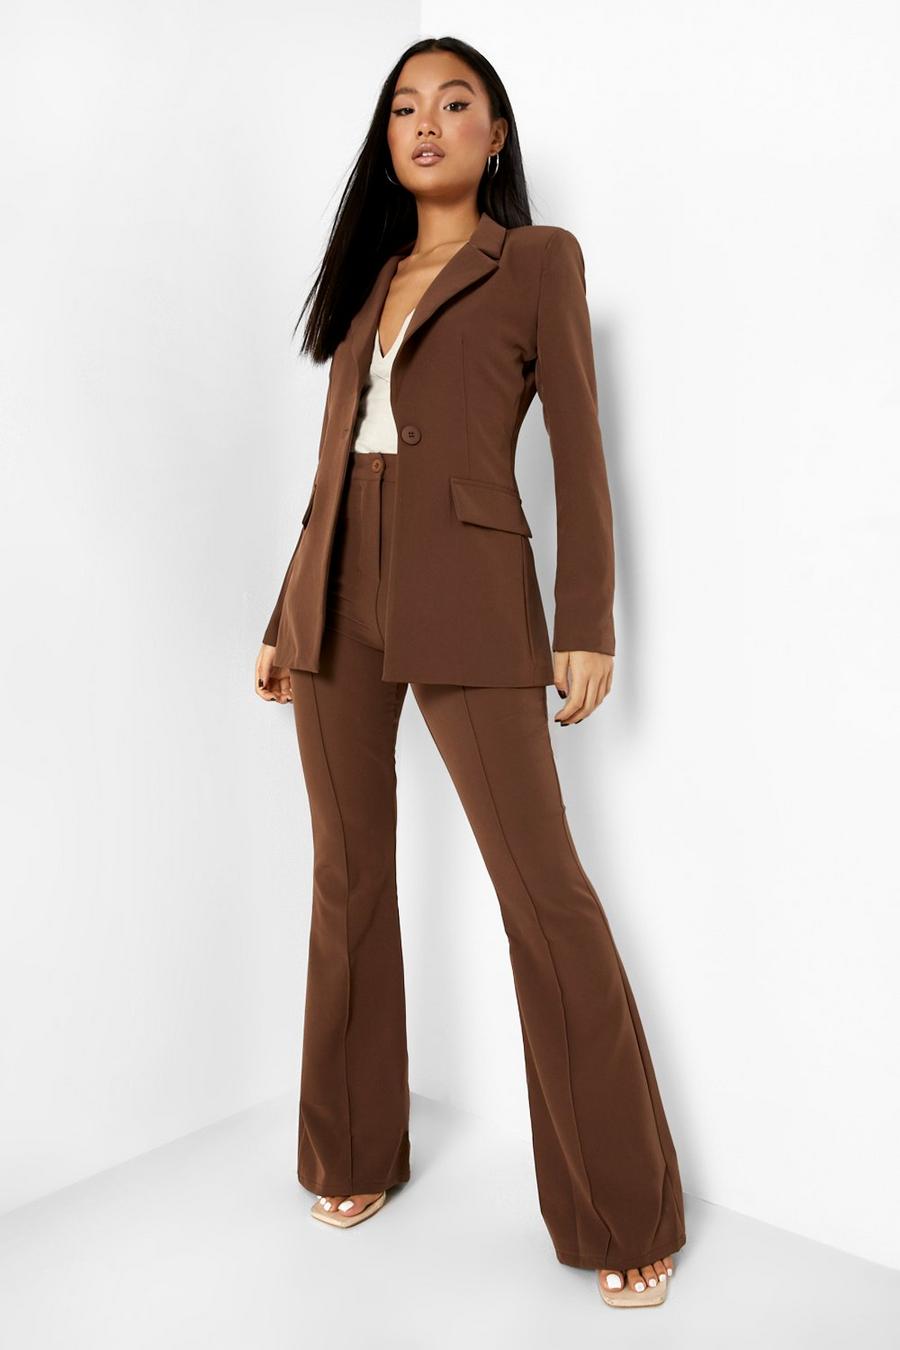 Blue Petite Dressy Pant Suits and Sets  Dressy pant suits, Dressy pants  outfits, Dressy pants